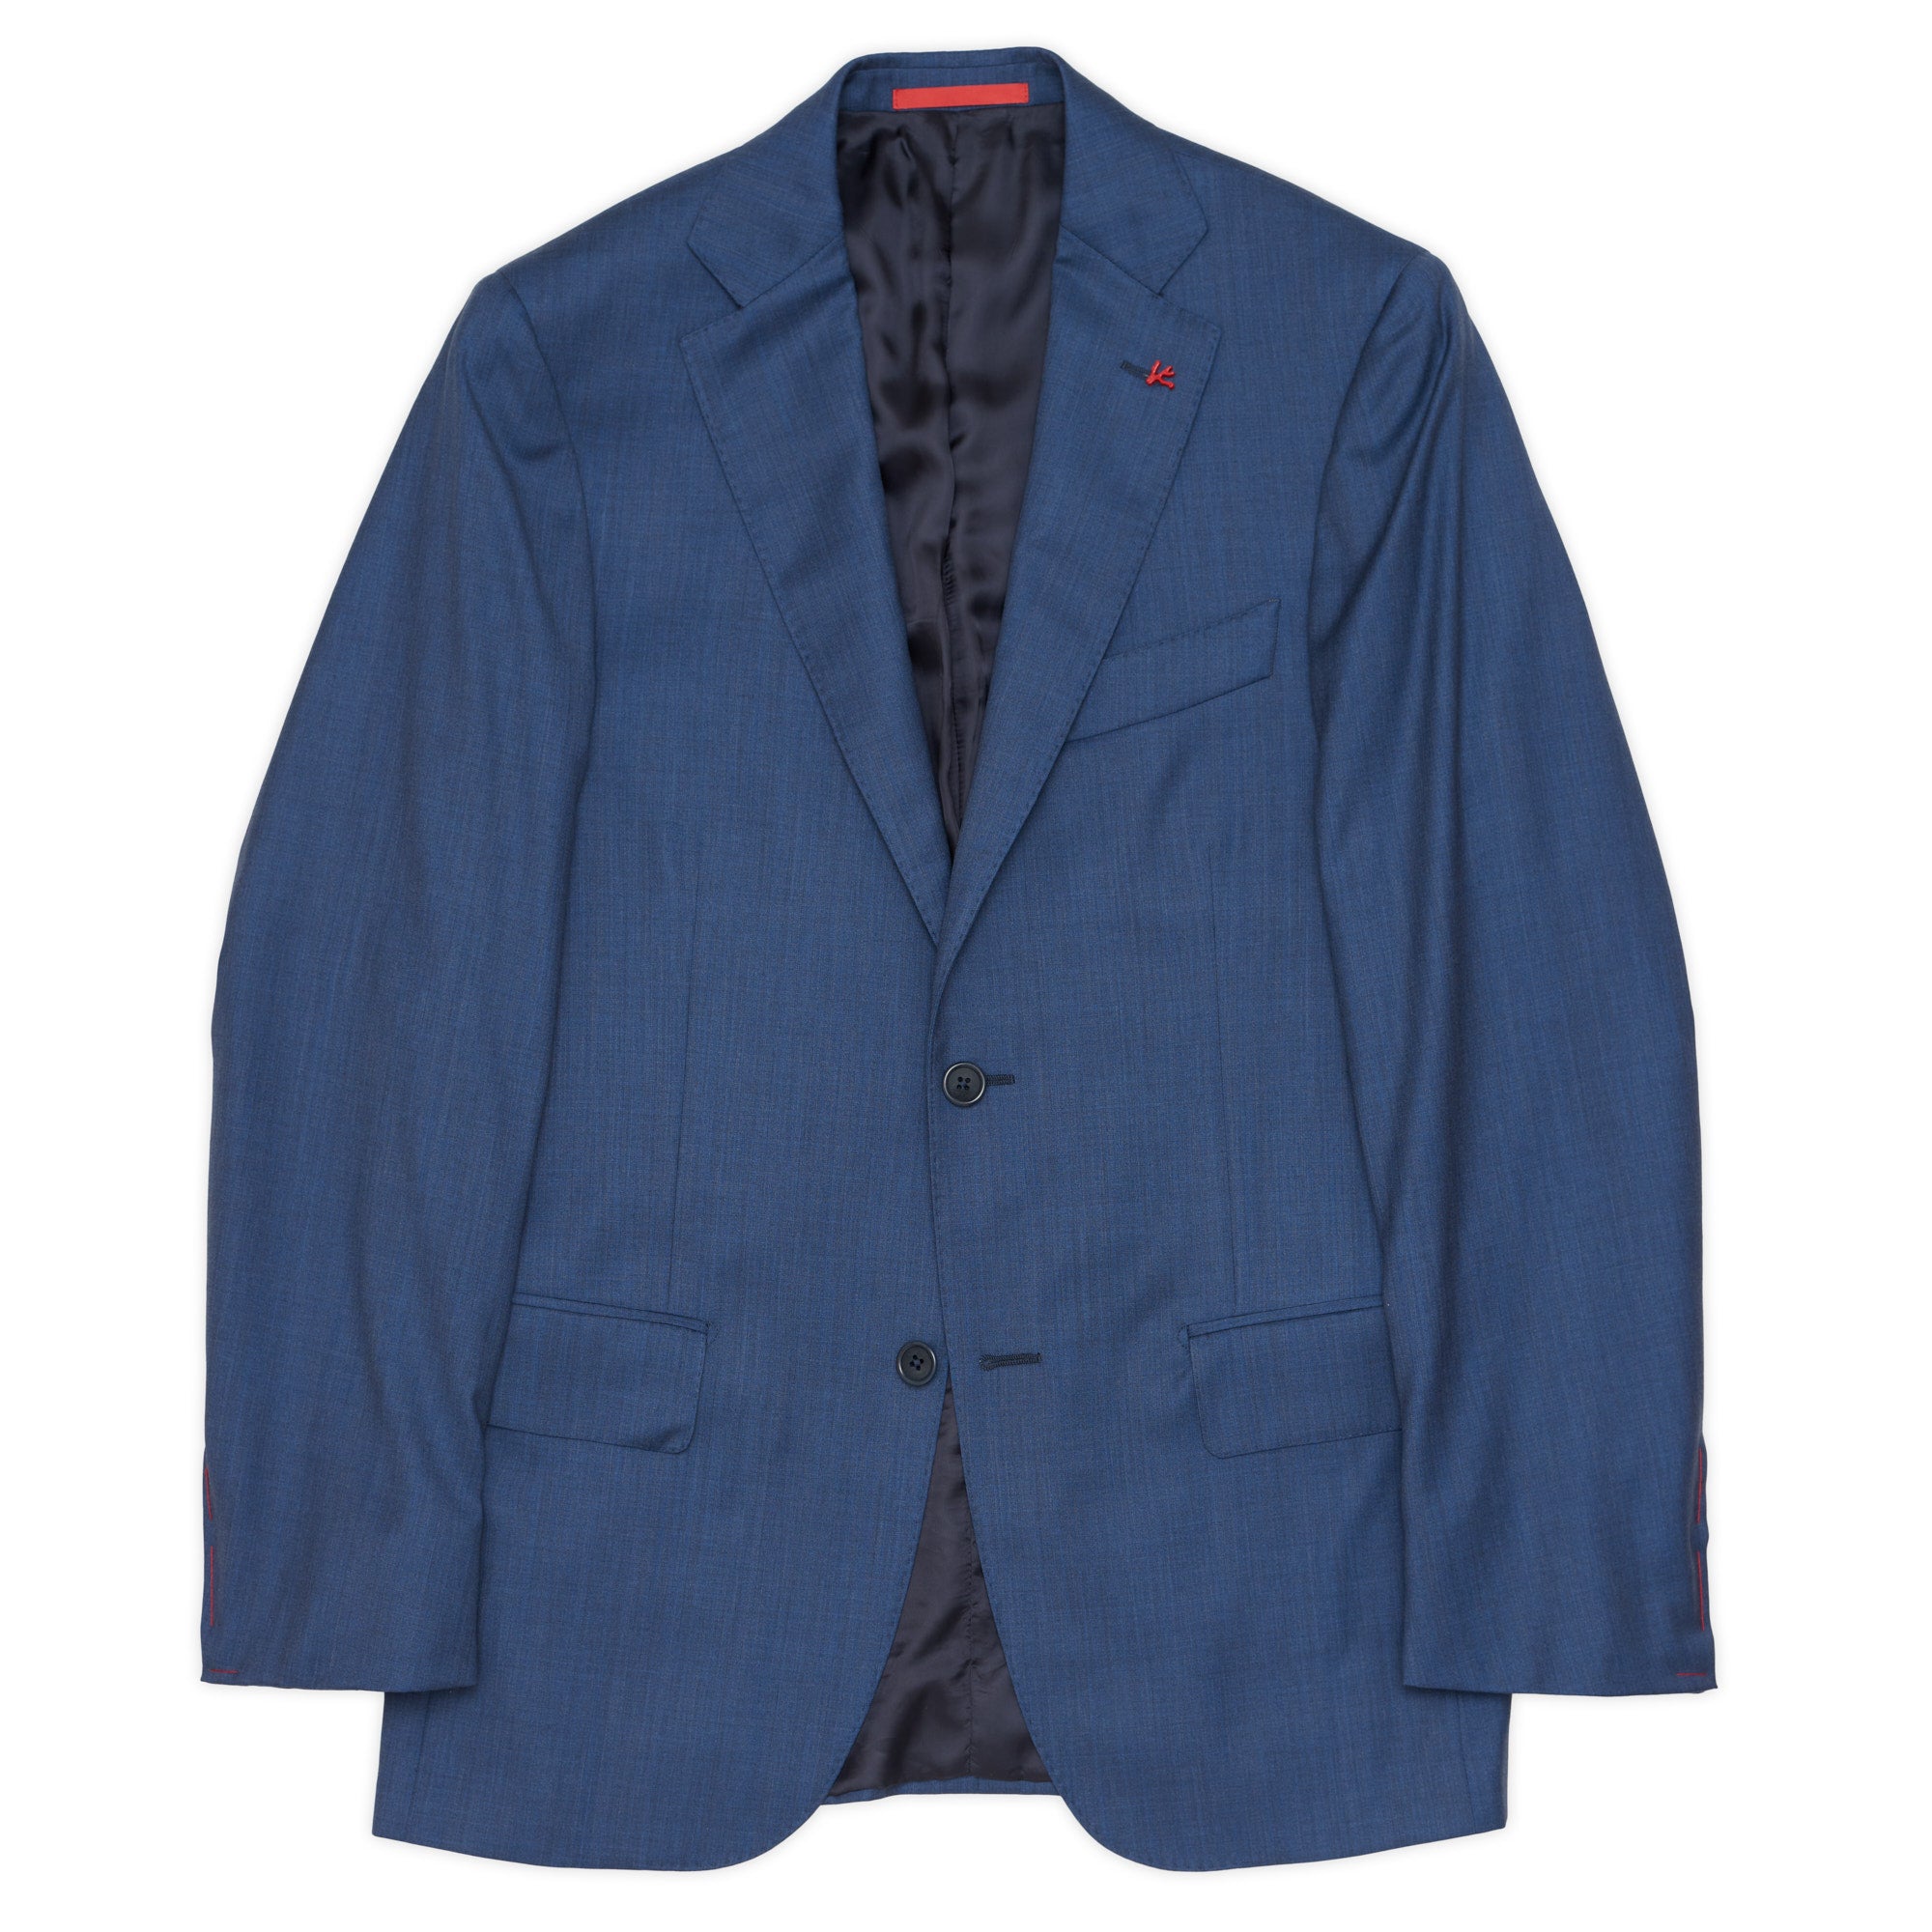 Isaia Menswear at Sartoriale.com - The Luxury Store for Men -